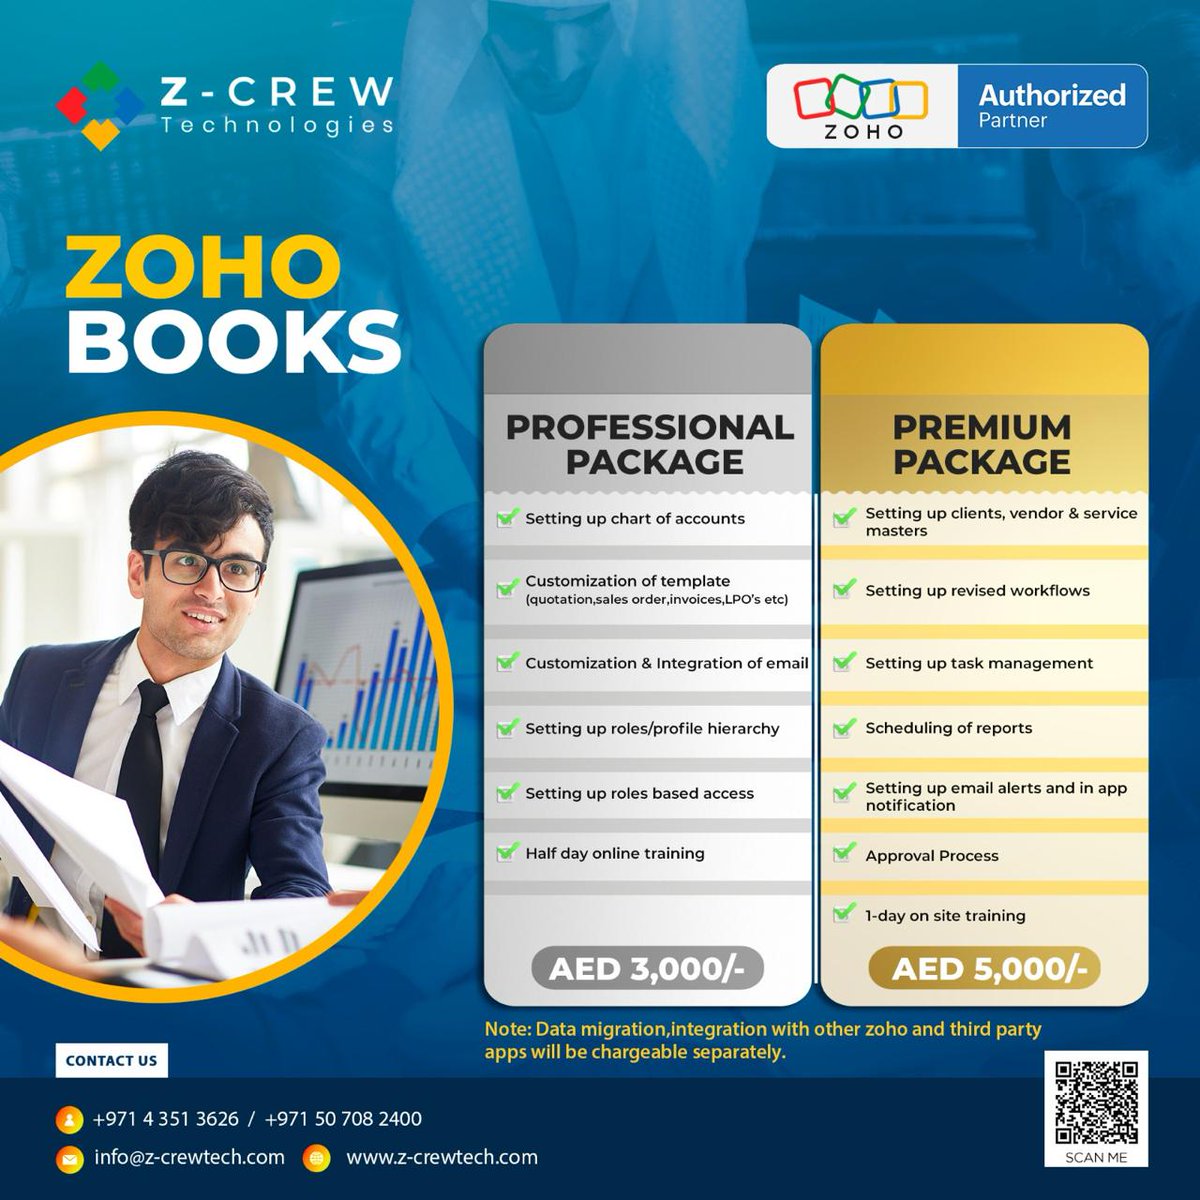 Transform your business with our exclusive #ZohoBooks Packages! Whether you're just starting or looking to enhance your current system, we have the perfect solution for you.
𝗭-𝗖𝗿𝗲𝘄 𝗧𝗲𝗰𝗵𝗻𝗼𝗹𝗼𝗴𝗶𝗲𝘀 | 𝗭𝗼𝗵𝗼 𝗔𝘂𝘁𝗵𝗼𝗿𝗶𝘇𝗲𝗱 𝗣𝗮𝗿𝘁𝗻𝗲𝗿 | 𝗨𝗔𝗘